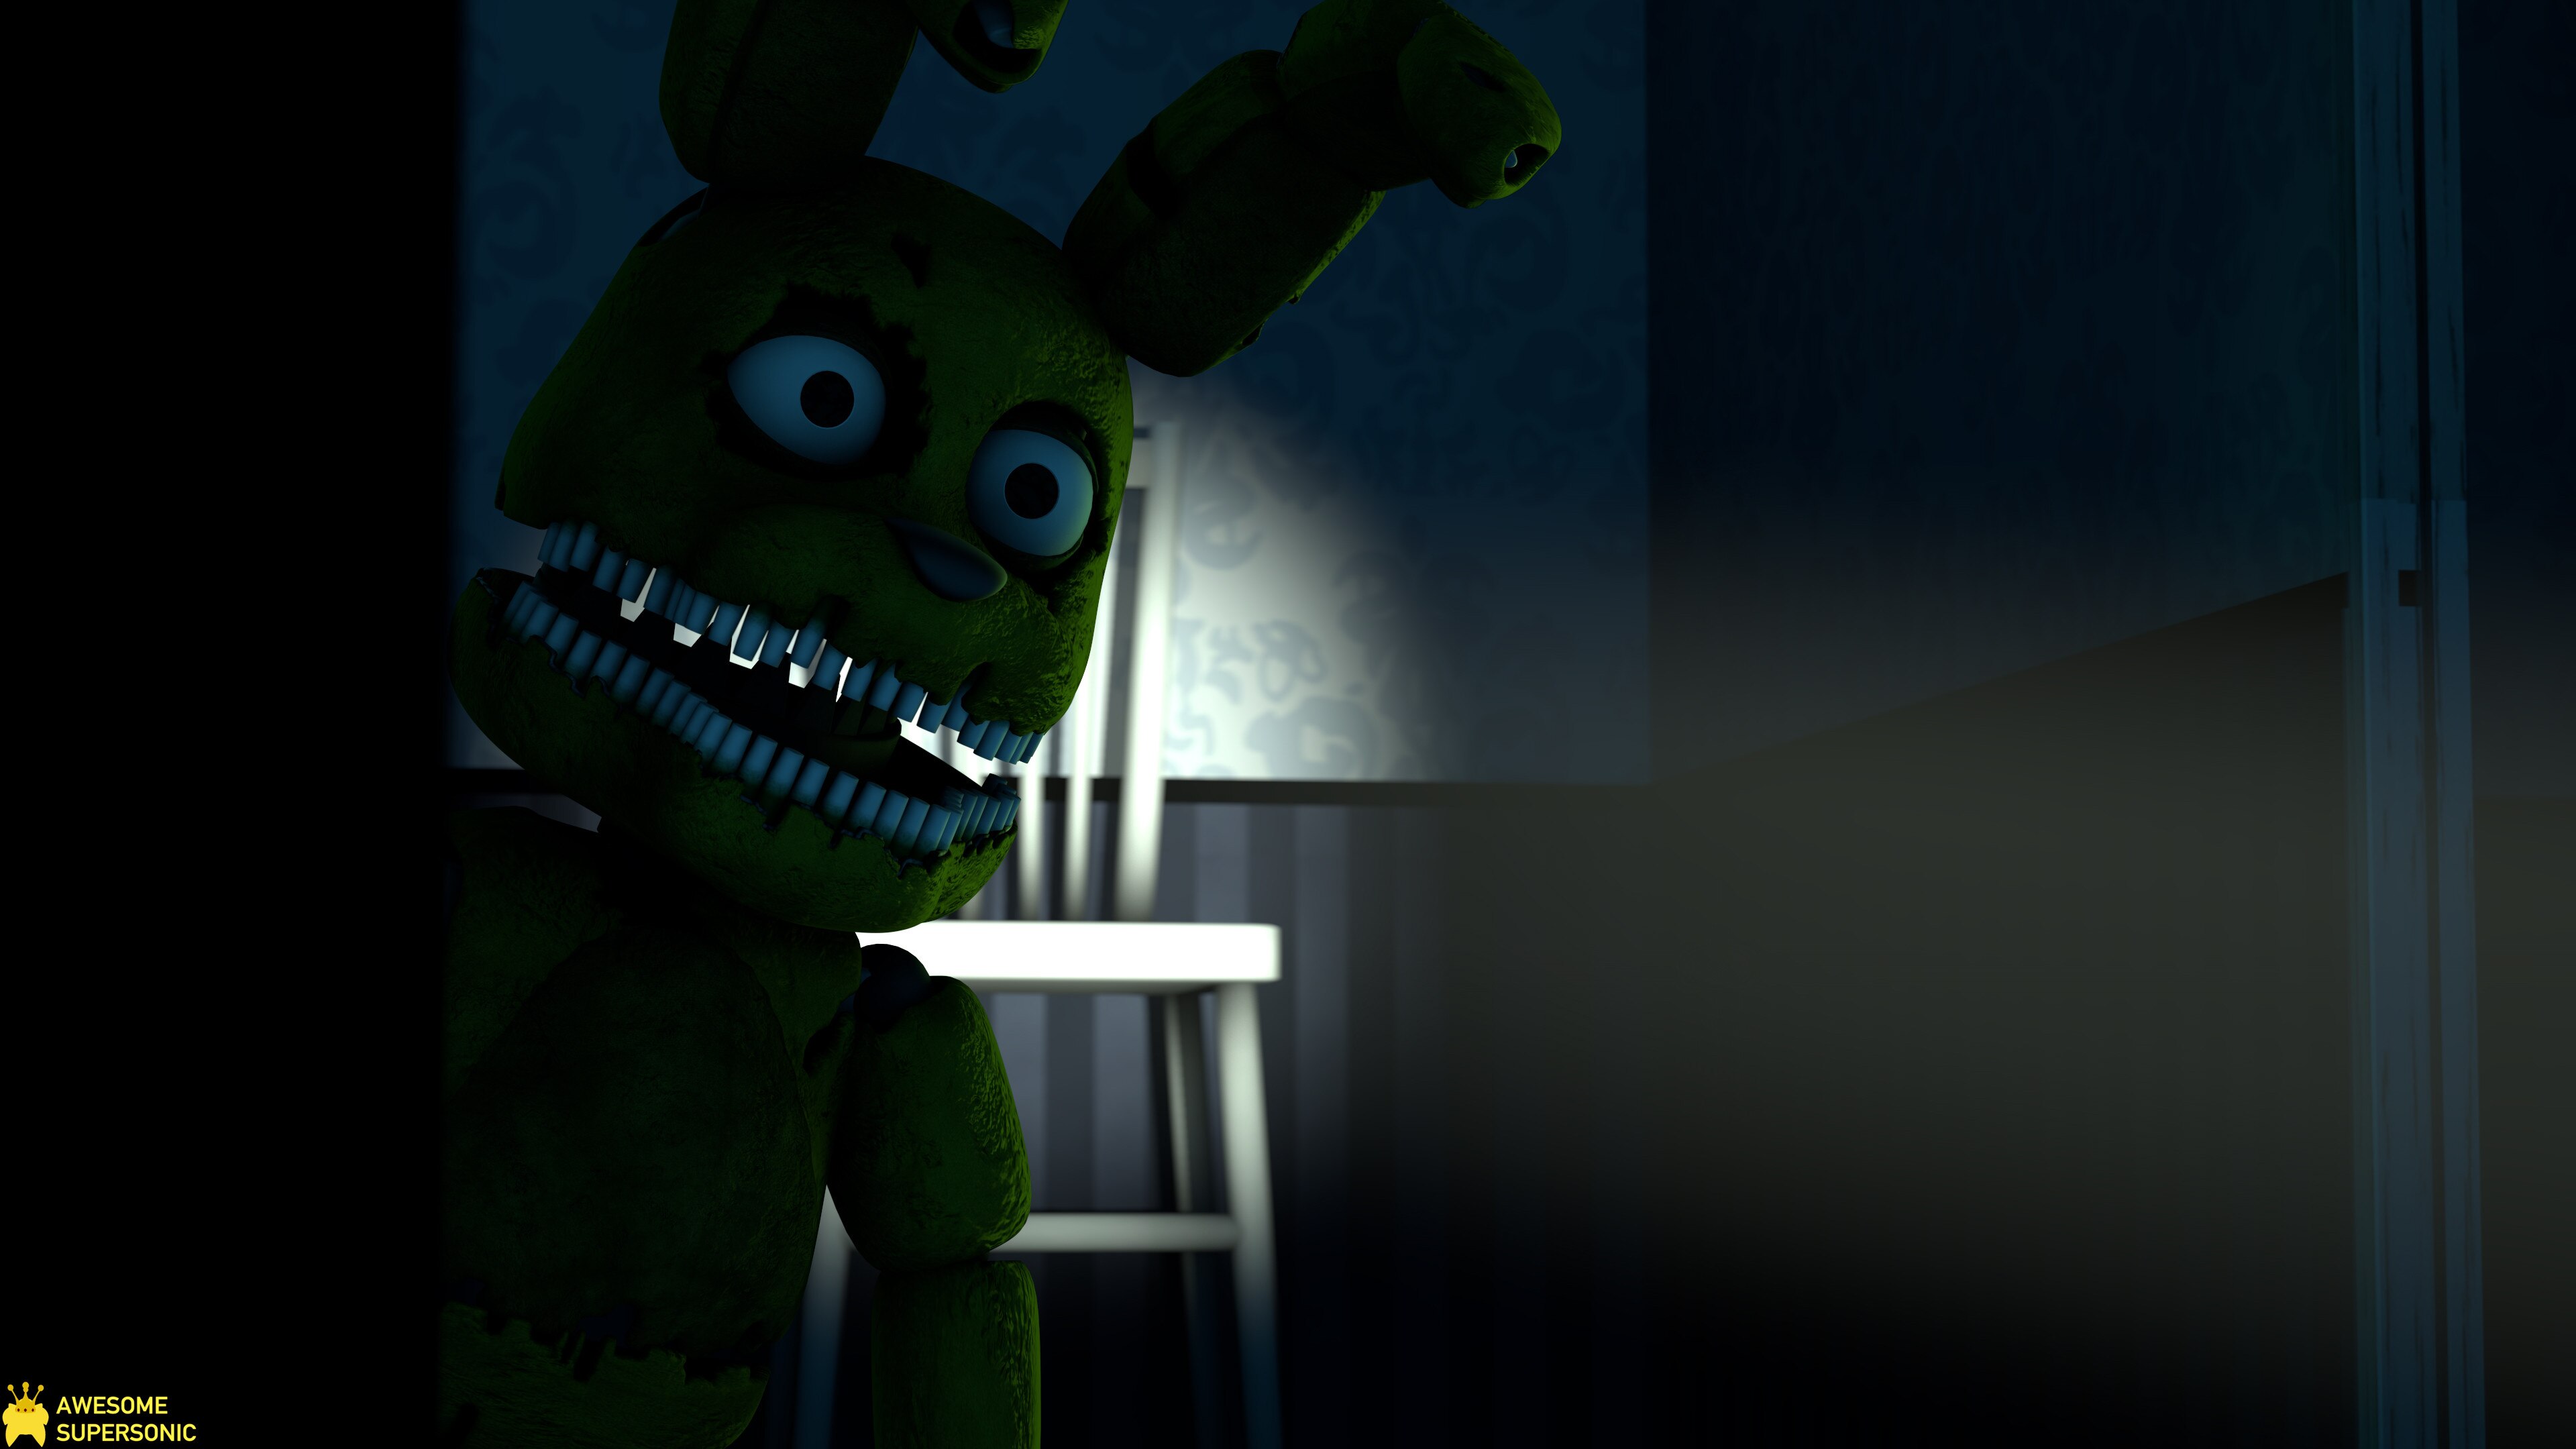 Steam Workshop::FNAF 4 - Plushtrap's Chair (Plushtrap is not included)